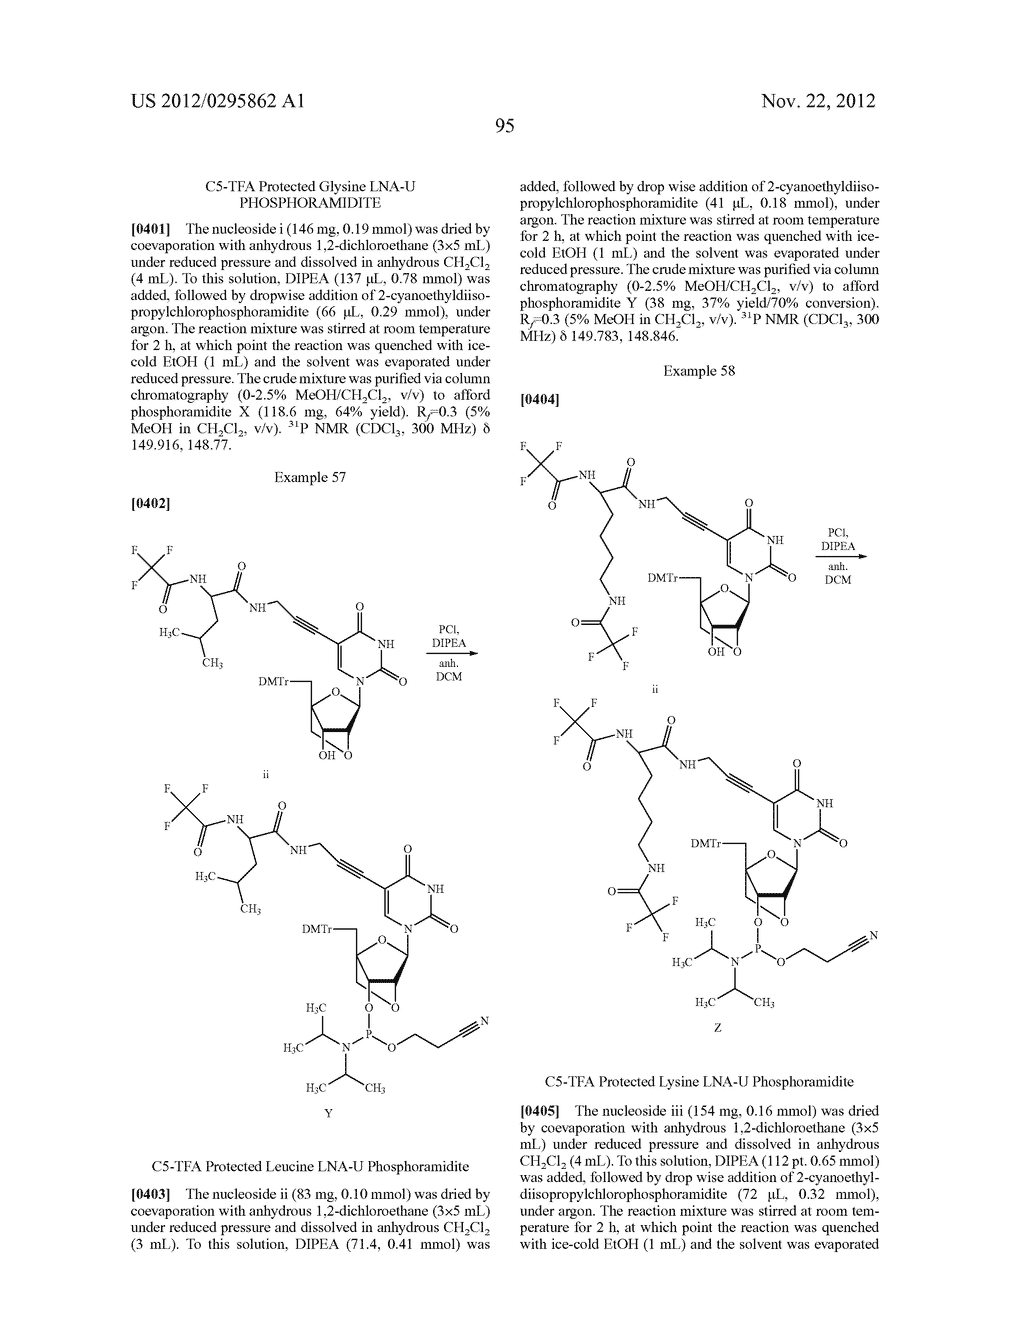 NUCLEOBASE-FUNCTIONALIZED CONFORMATIONALLY RESTRICTED NUCLEOTIDES AND     OLIGONUCLEOTIDES FOR TARGETING OF NUCLEIC ACIDS - diagram, schematic, and image 104